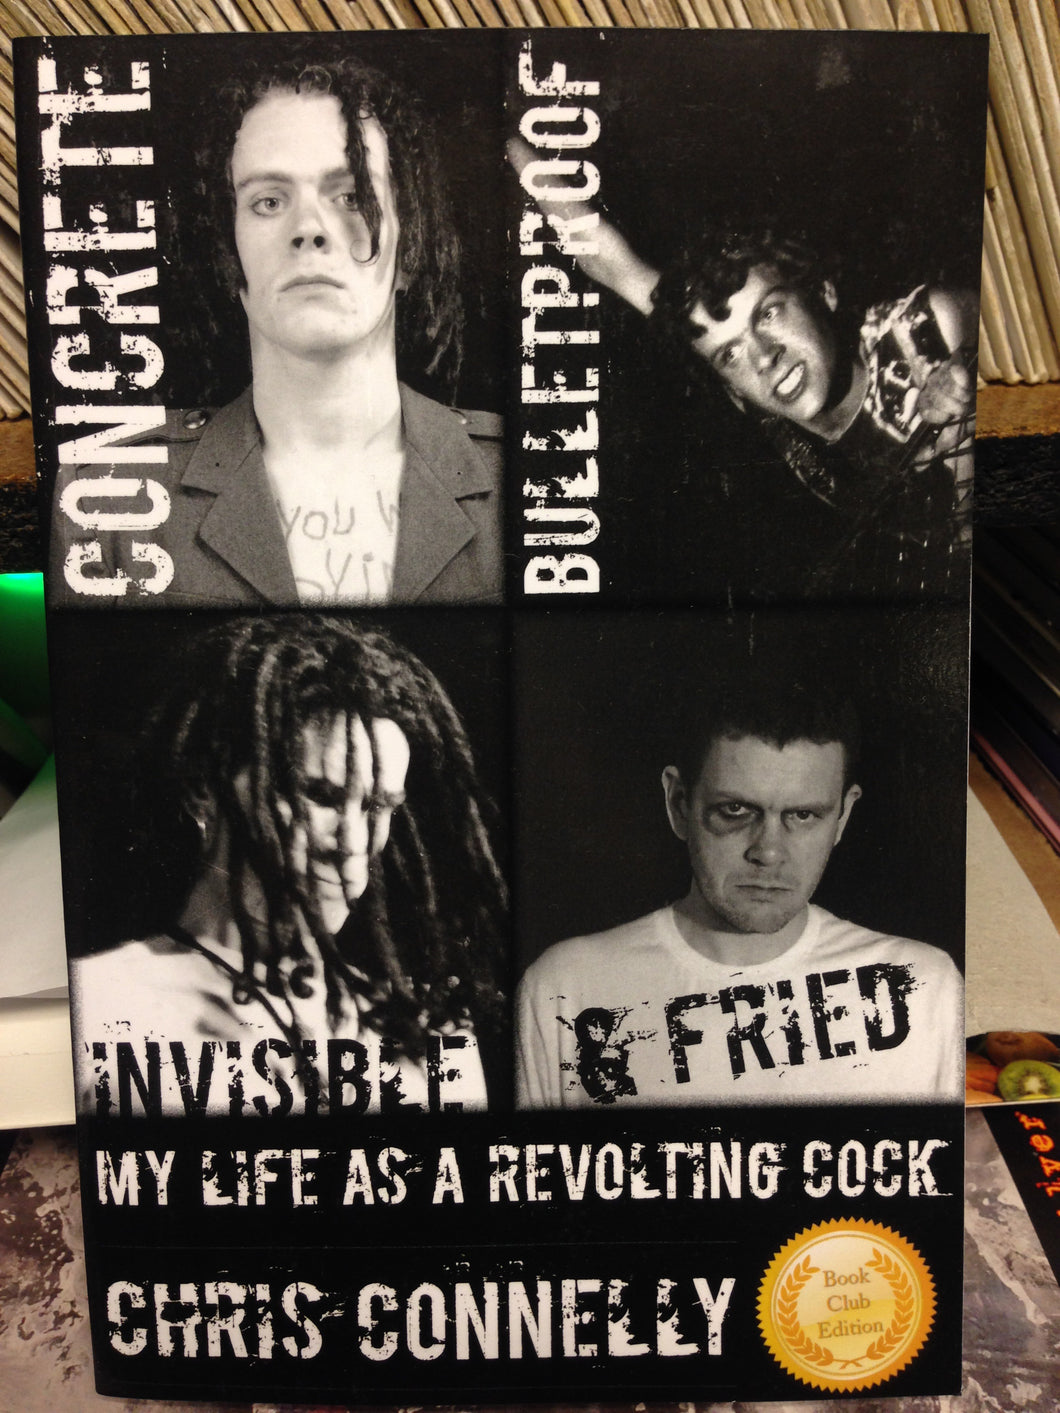 CHRIS CONNOLLY - My Life As A Revolting Cock : NEW BOOK